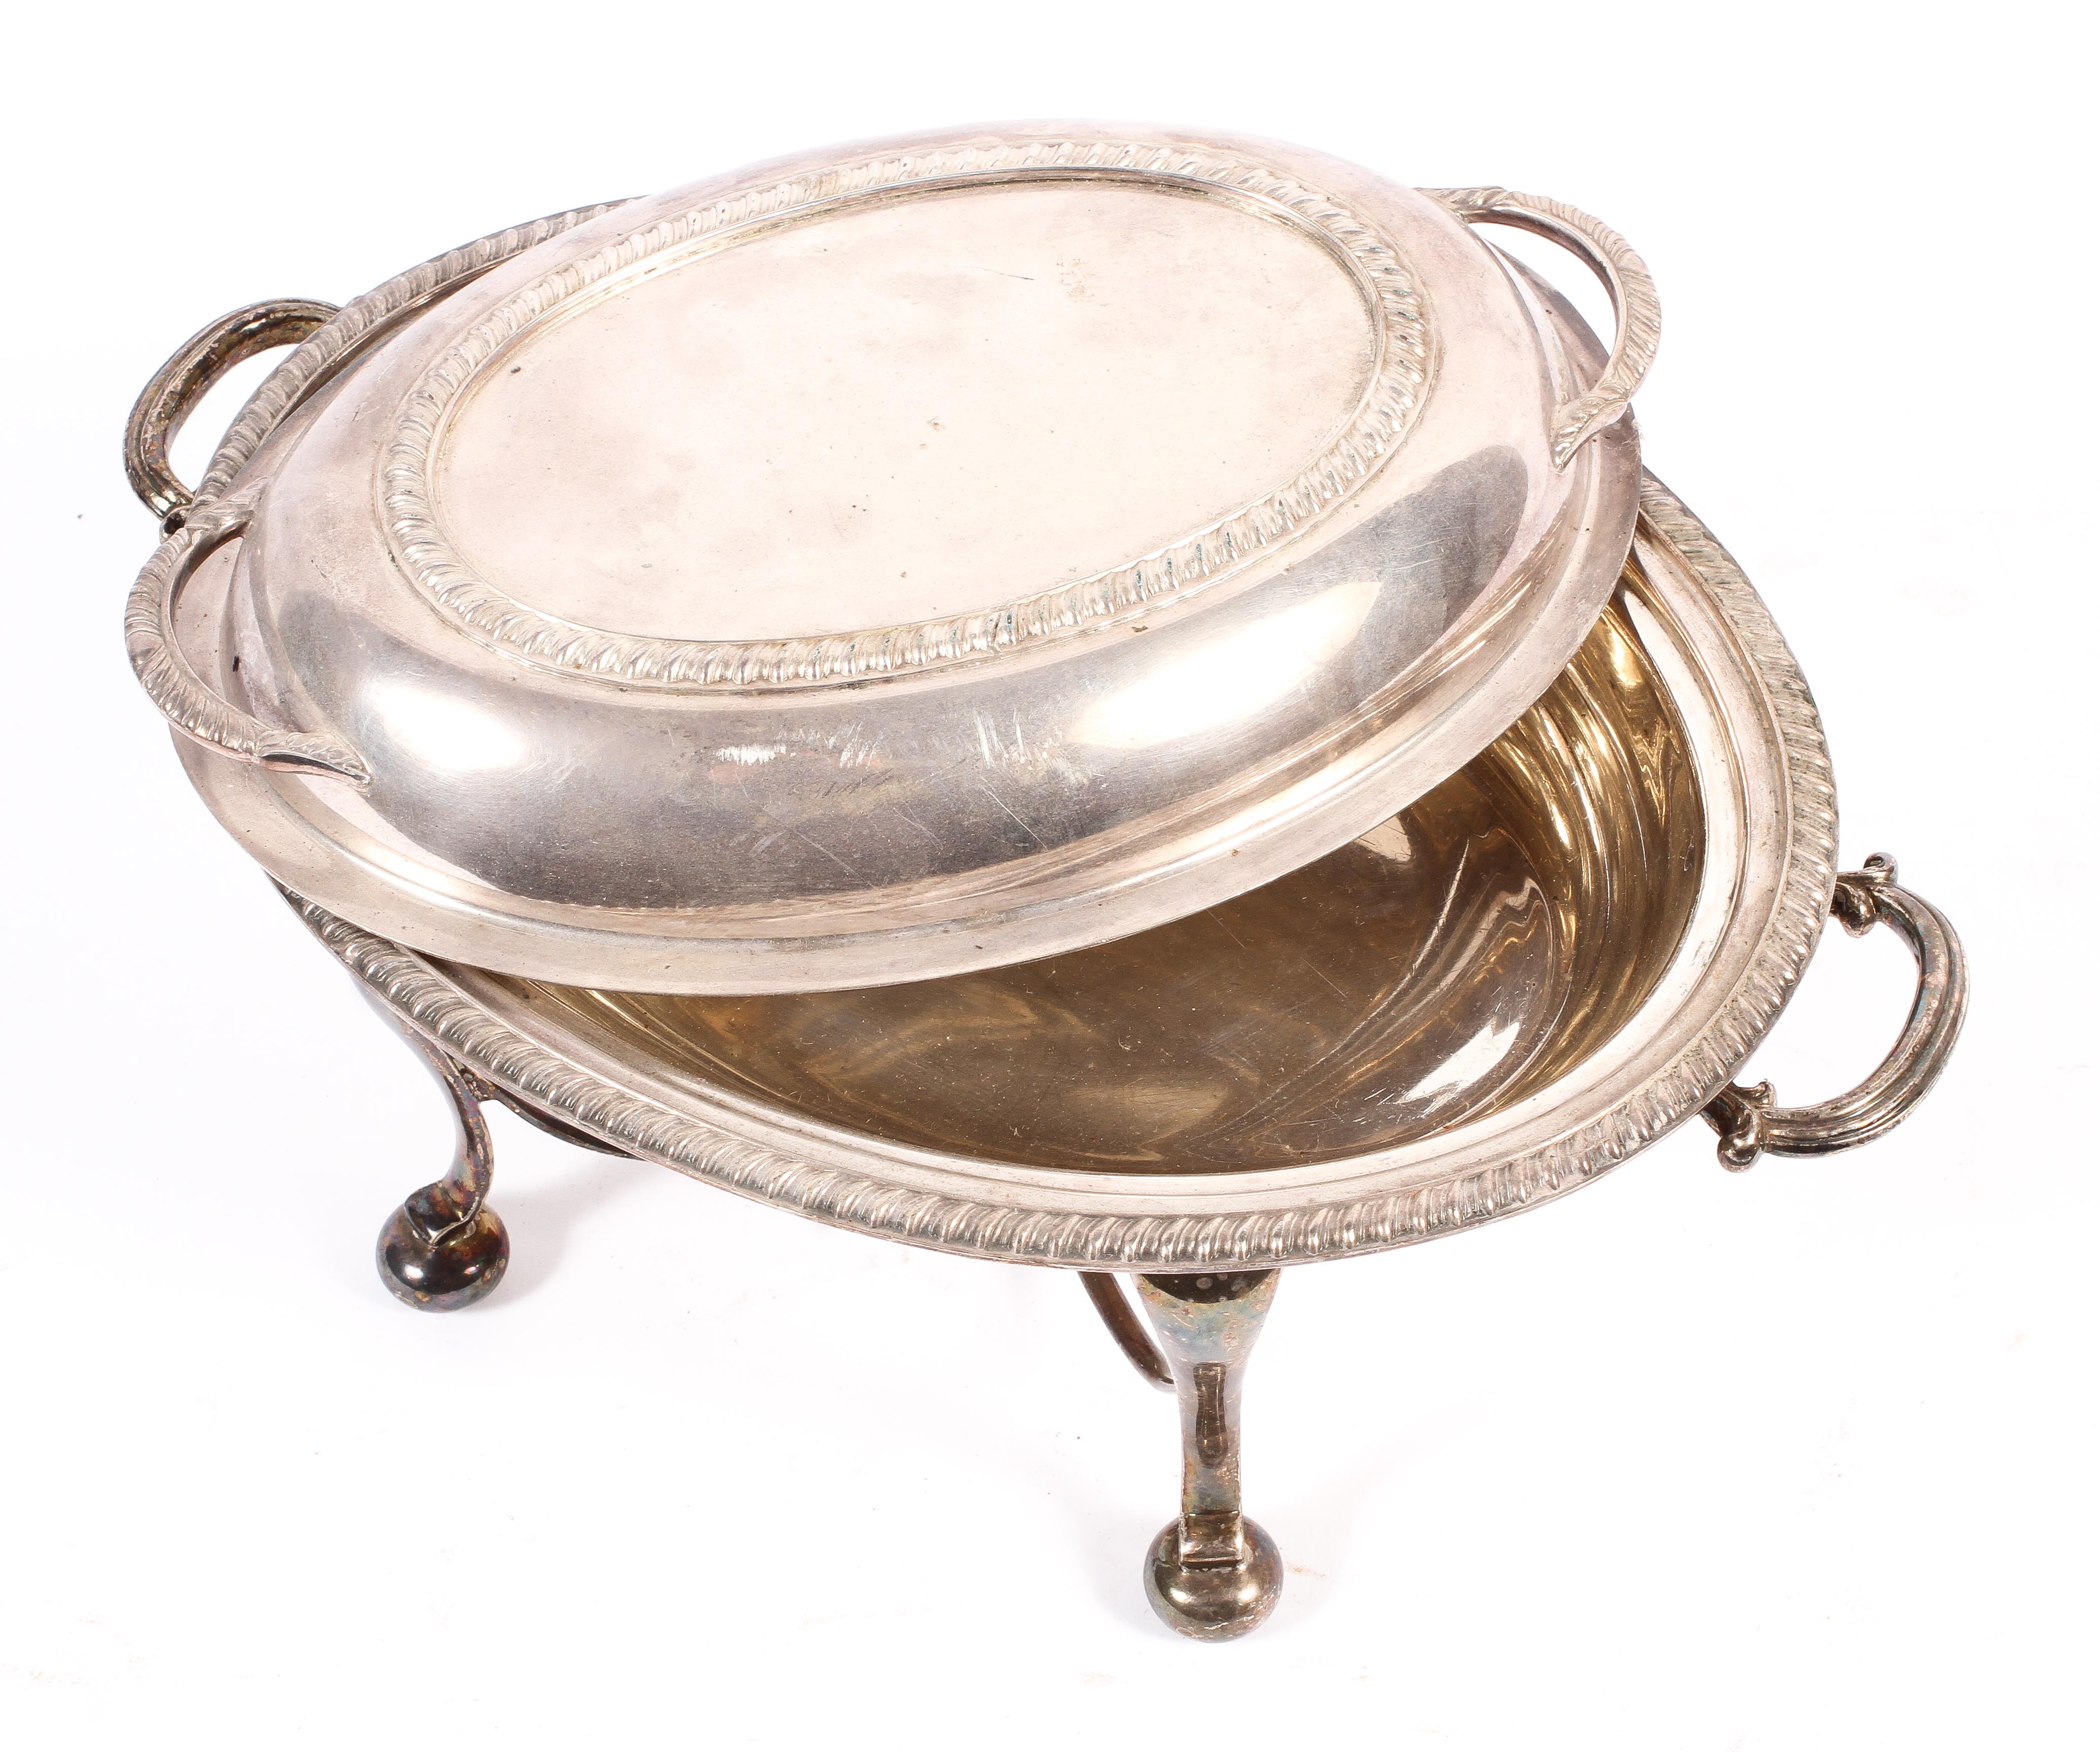 A lidded silver plated muffin dish or food warmer on plated stand with burner, - Image 2 of 2